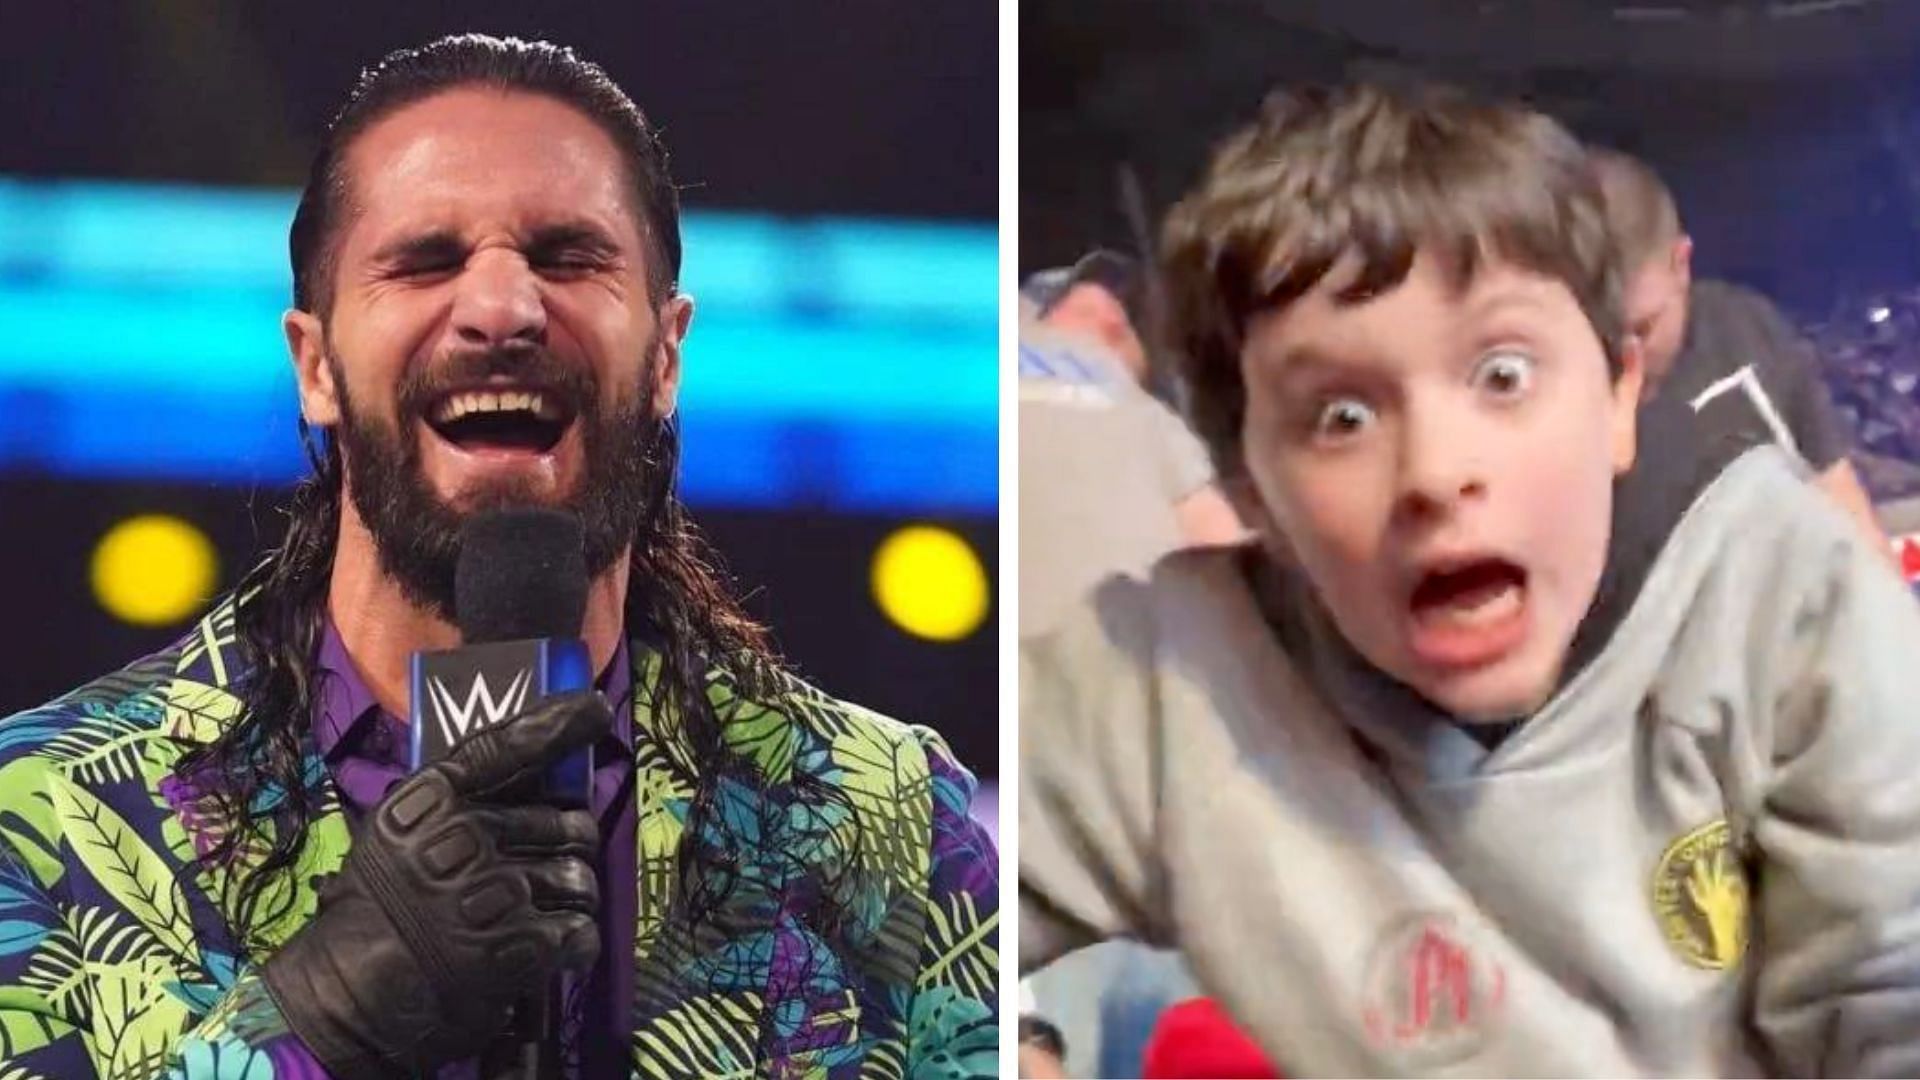 A young fan had a hilarious reaction to Seth Rollins at a recent event.